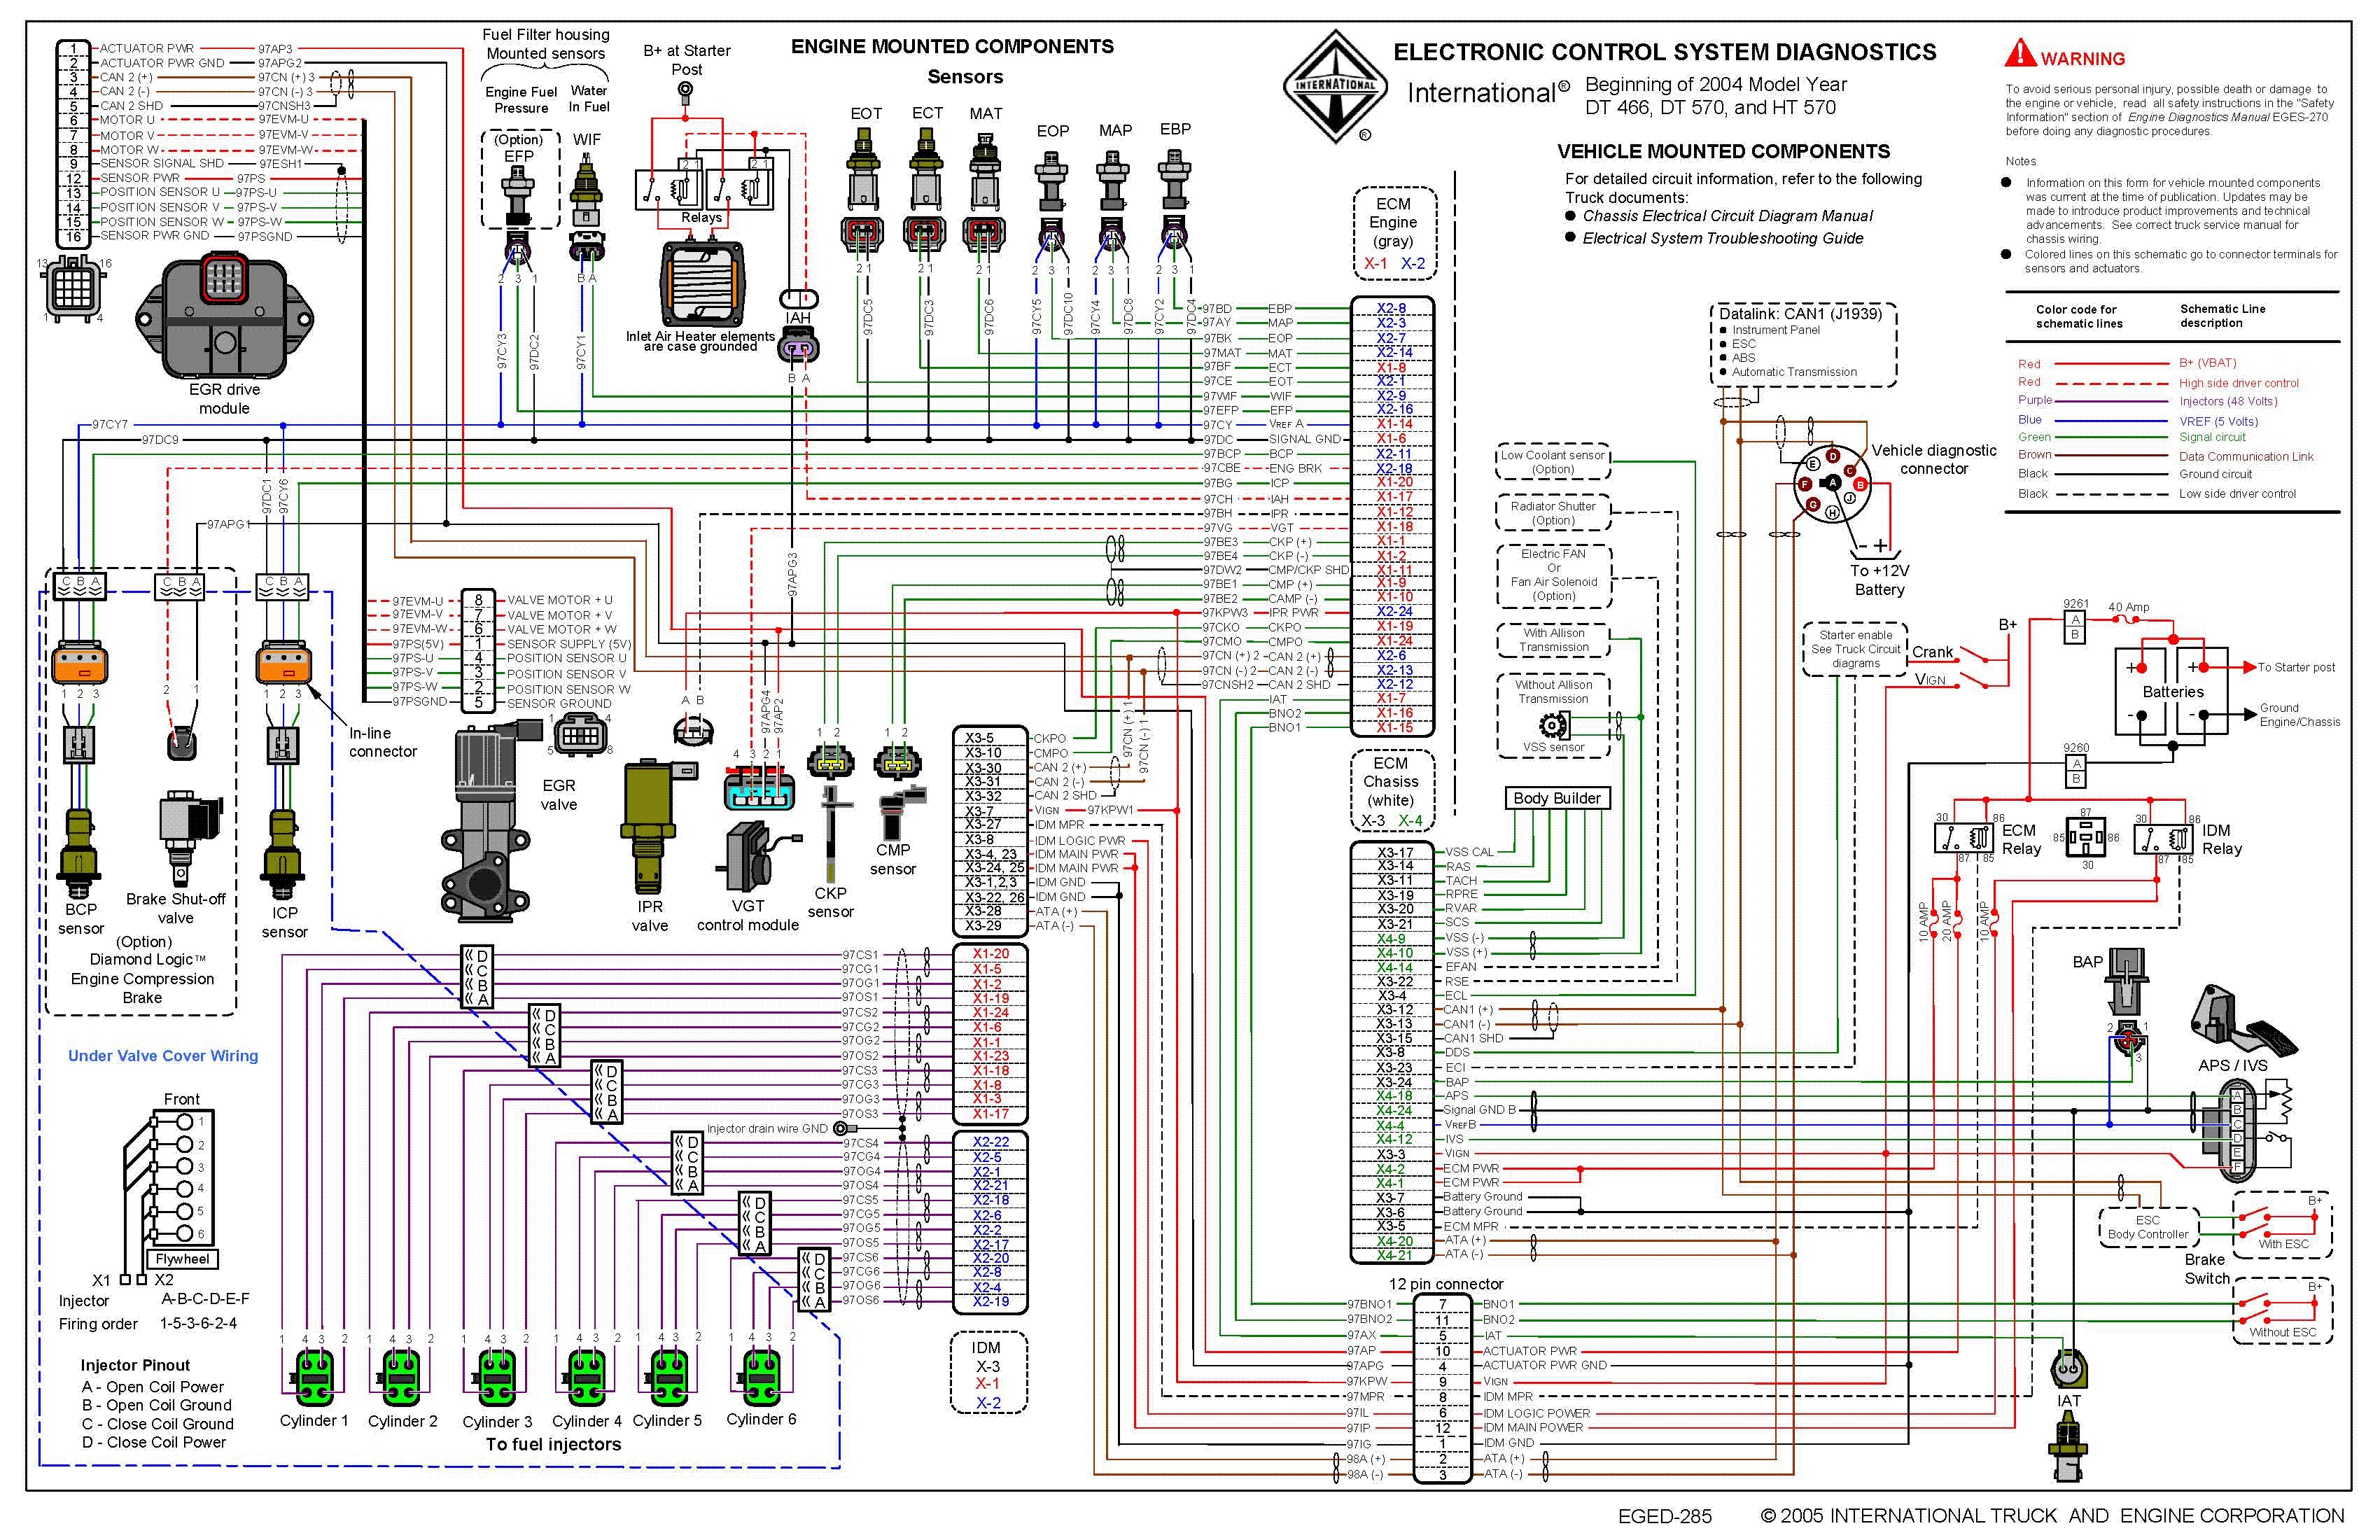 Dt466 Engine Diagram I Need Pin Out for C1 Ecm On Dt466 Engine In International 4900